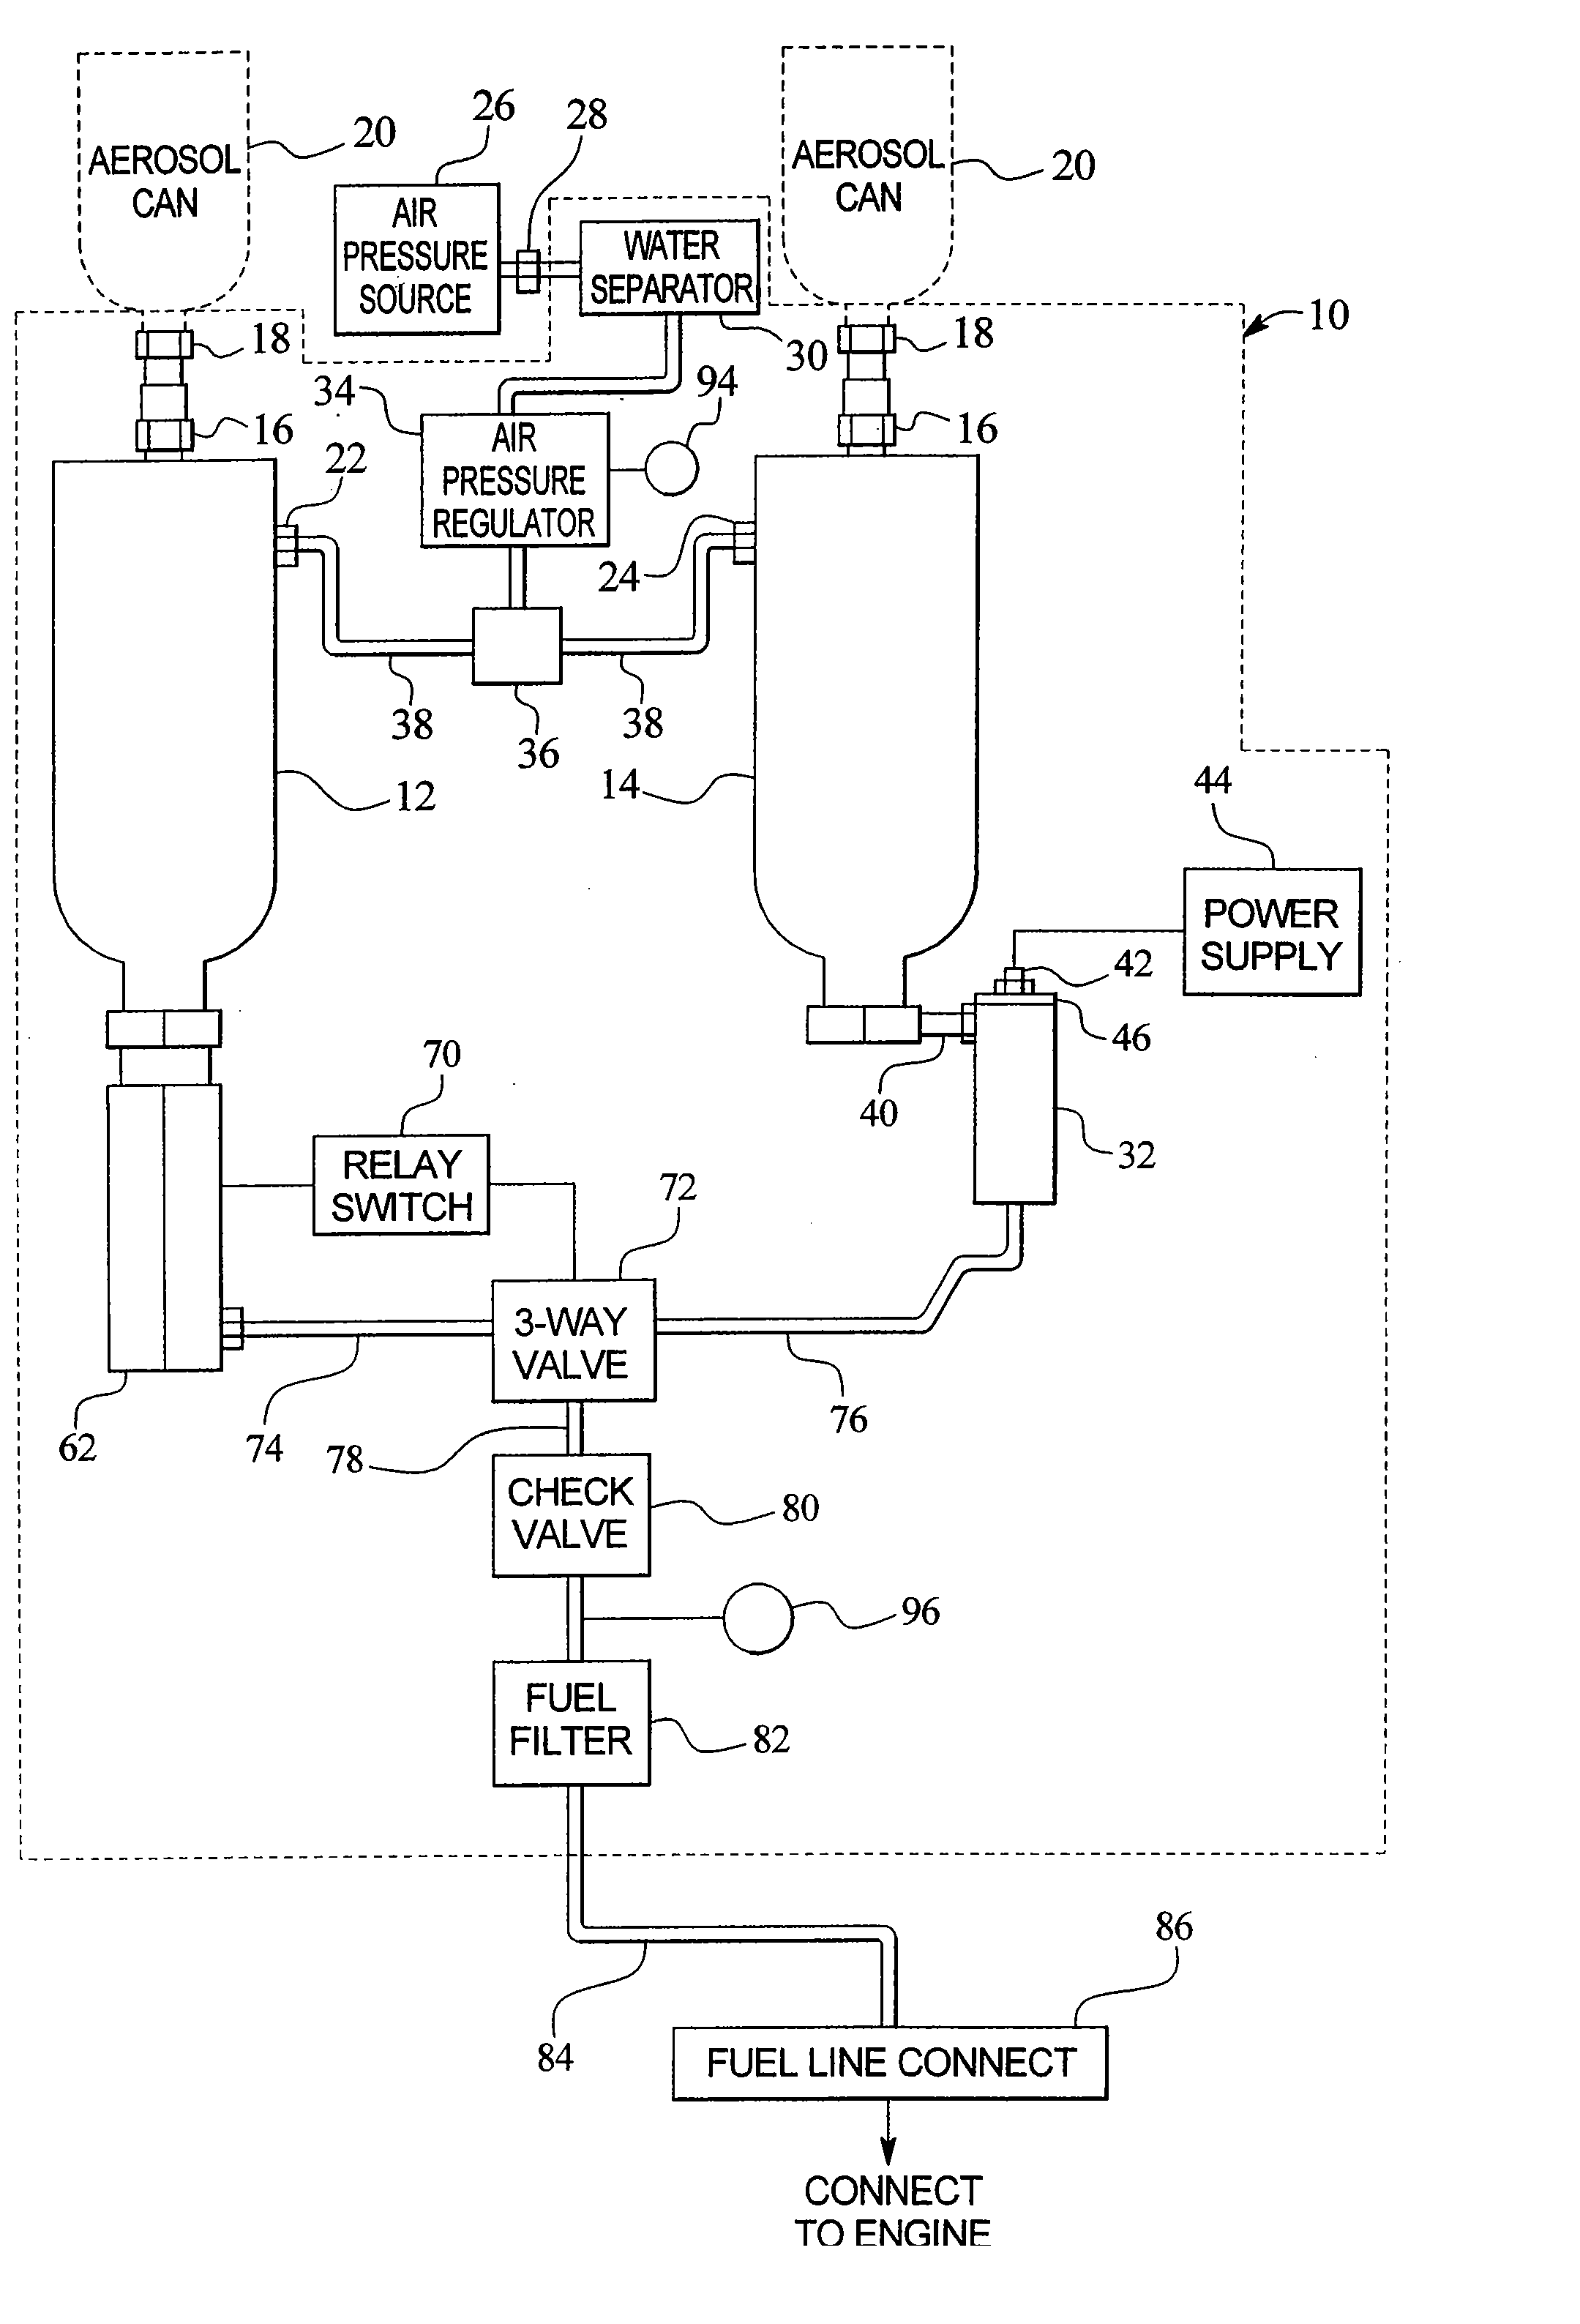 Apparatus and methods for cleaning combustion systems